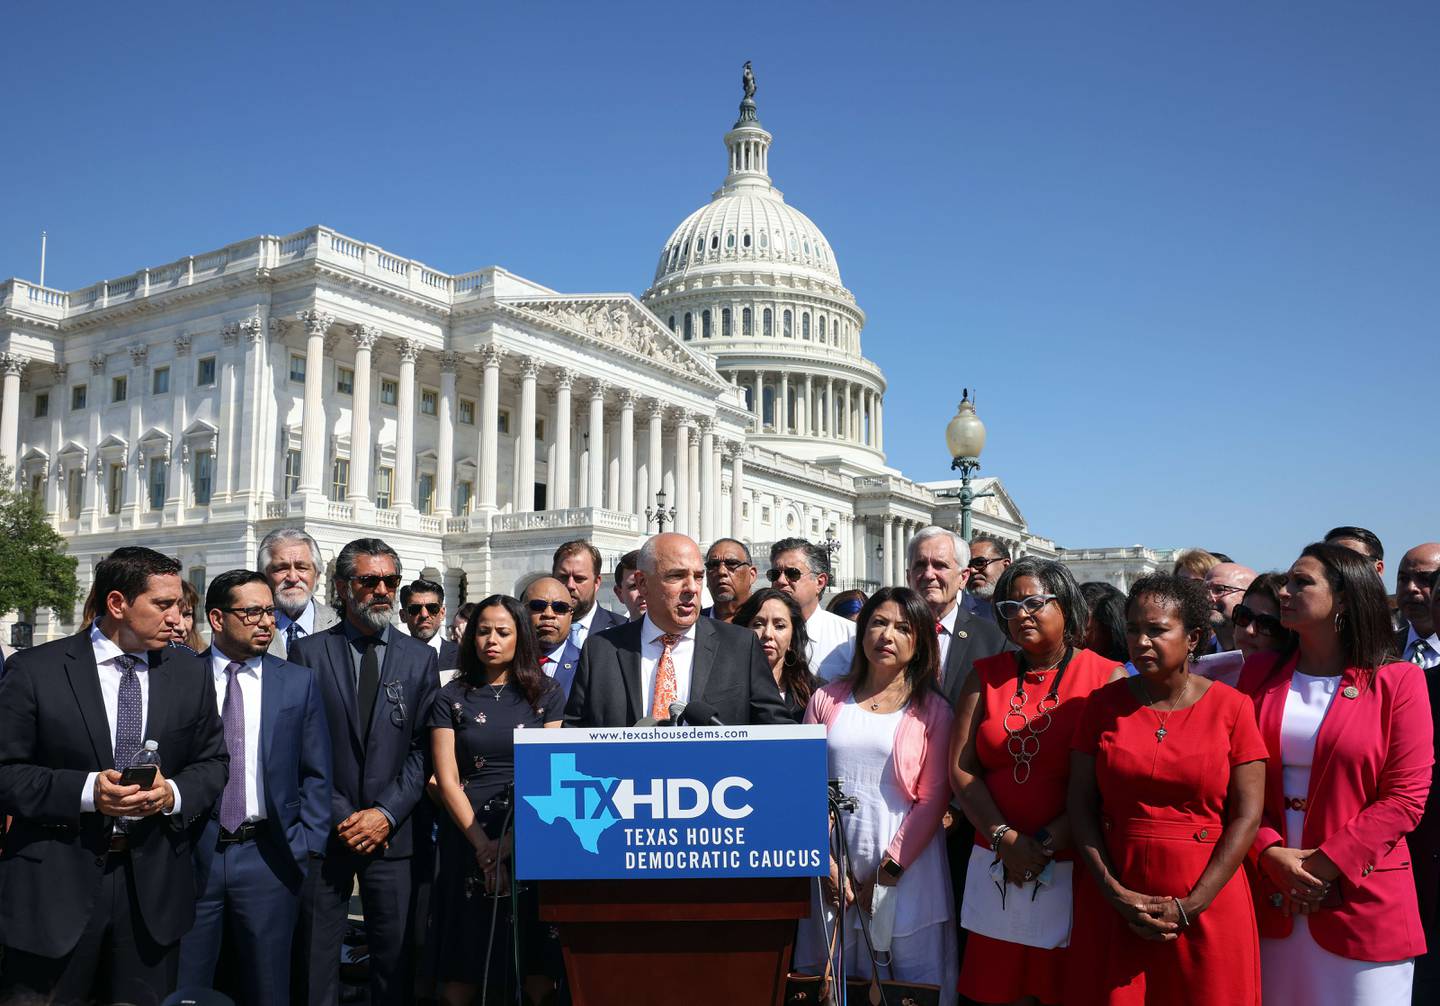 Joined by fellow Texas state House Democrats, Chris Turner speaks during a news conference on voting rights outside the US Capitol on July 13, 2021 in Washington. AFP